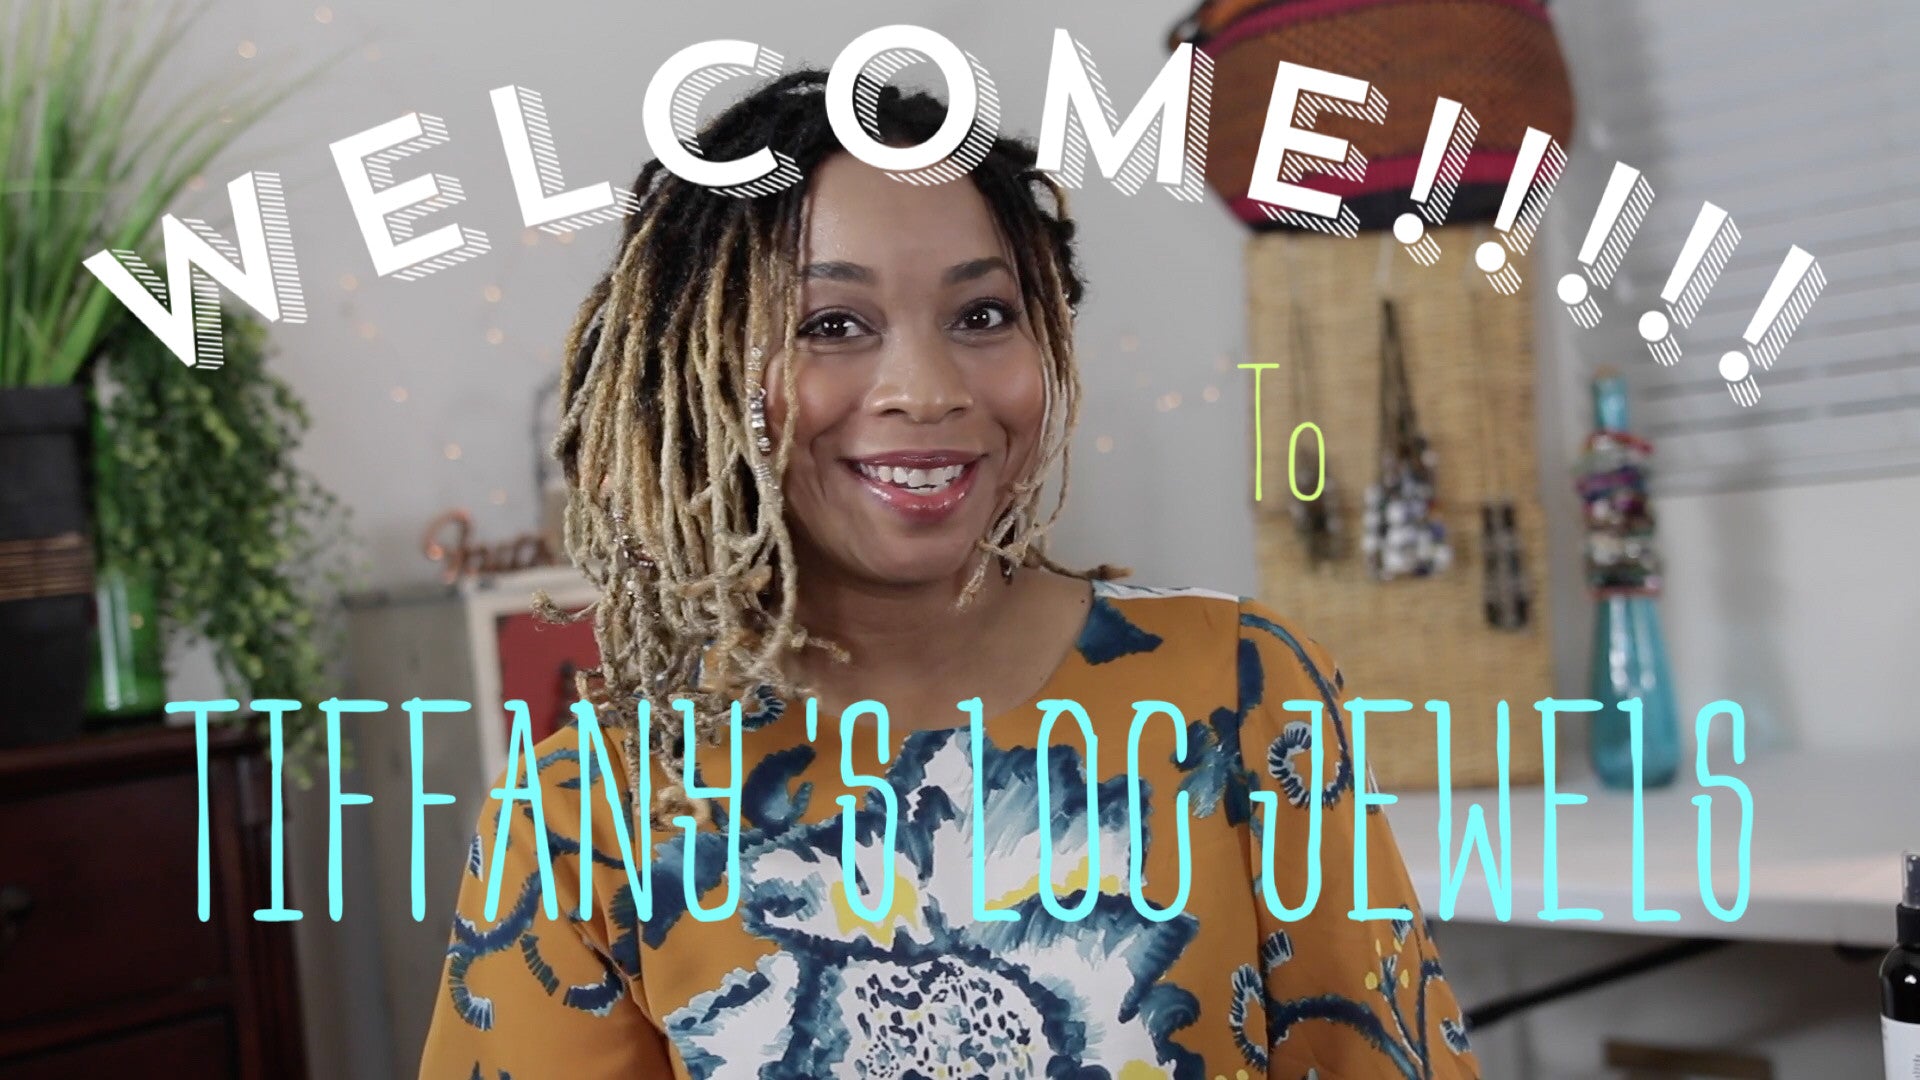 WELCOME TO TIFFANY'S LOC JEWELS VIDEO!